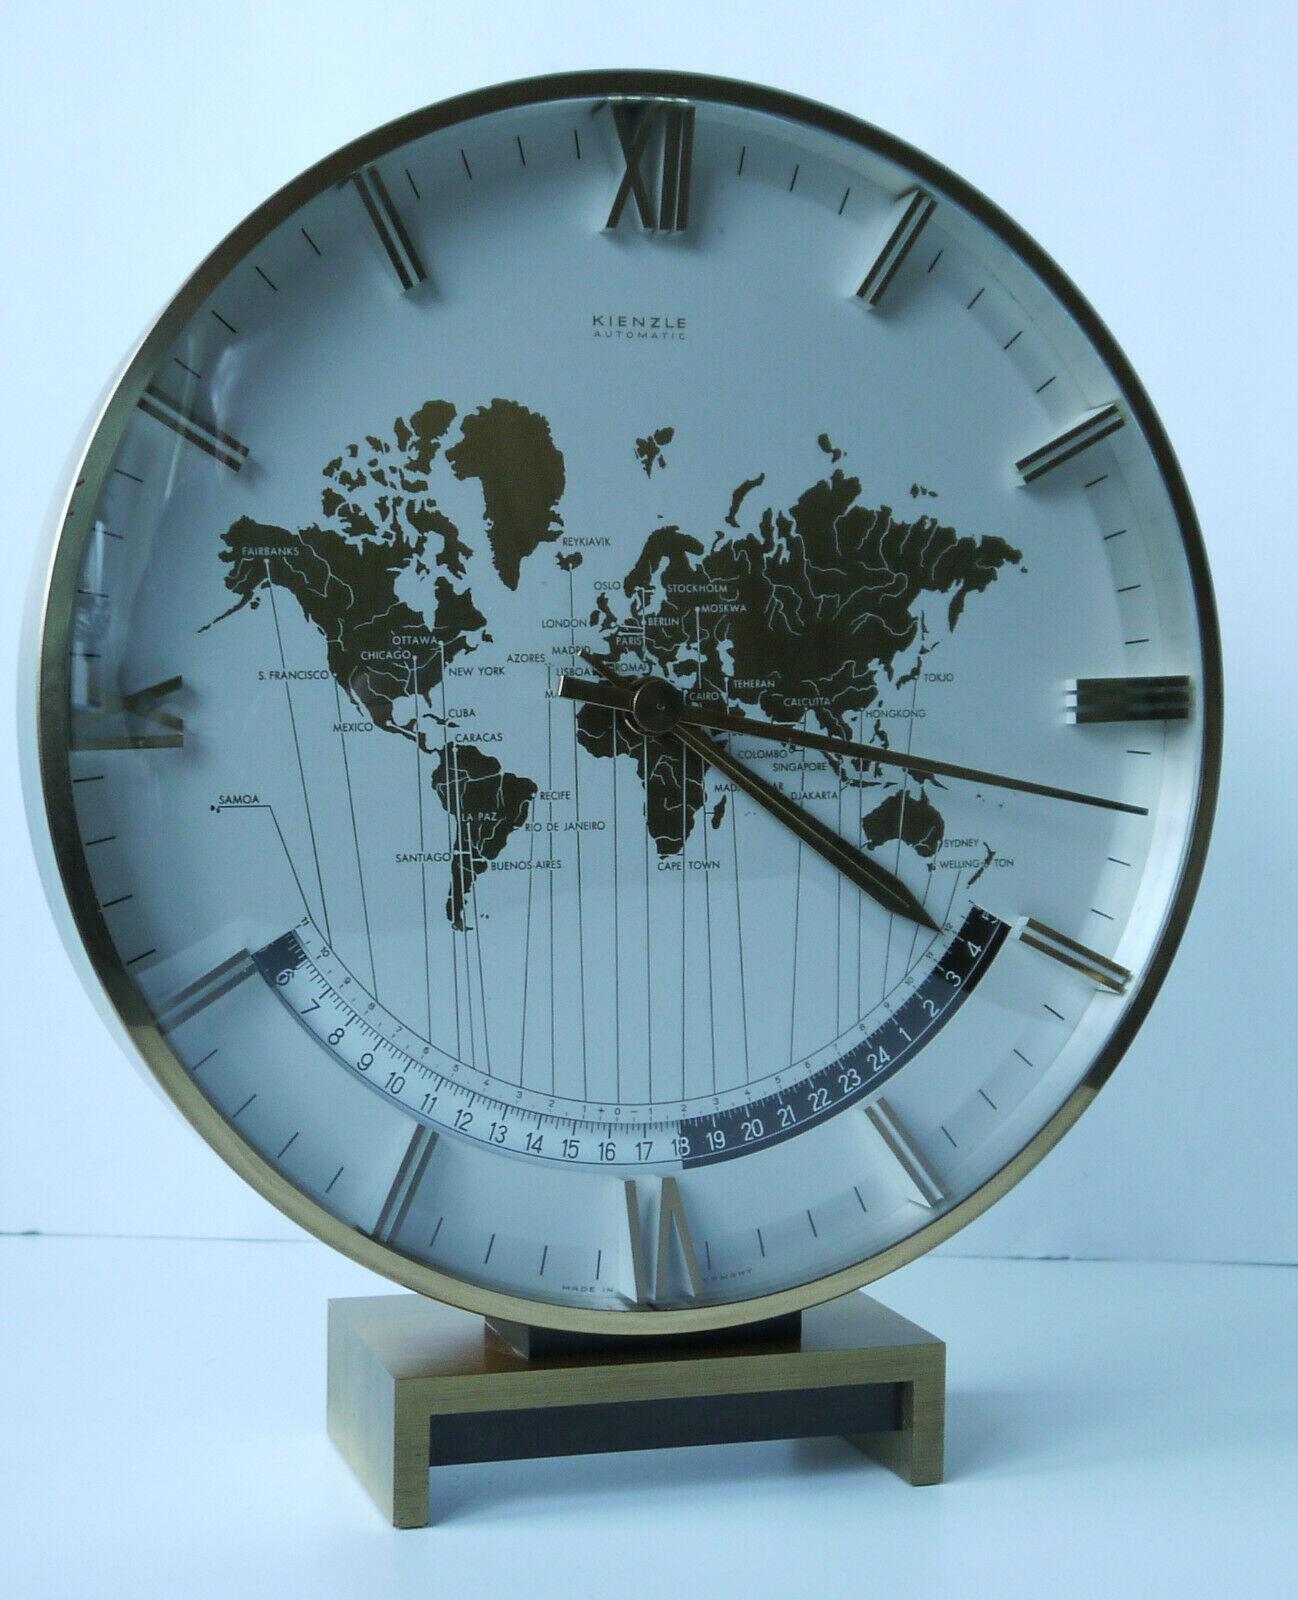 Kienzle automatic world timer zone clock.
An exclusive big table clock from Ø 26 cm wonderful clocks face with world map and world time zones, glass, the heavy case & base are of solid brass. Battery movement. The most of Kienzle clocks were